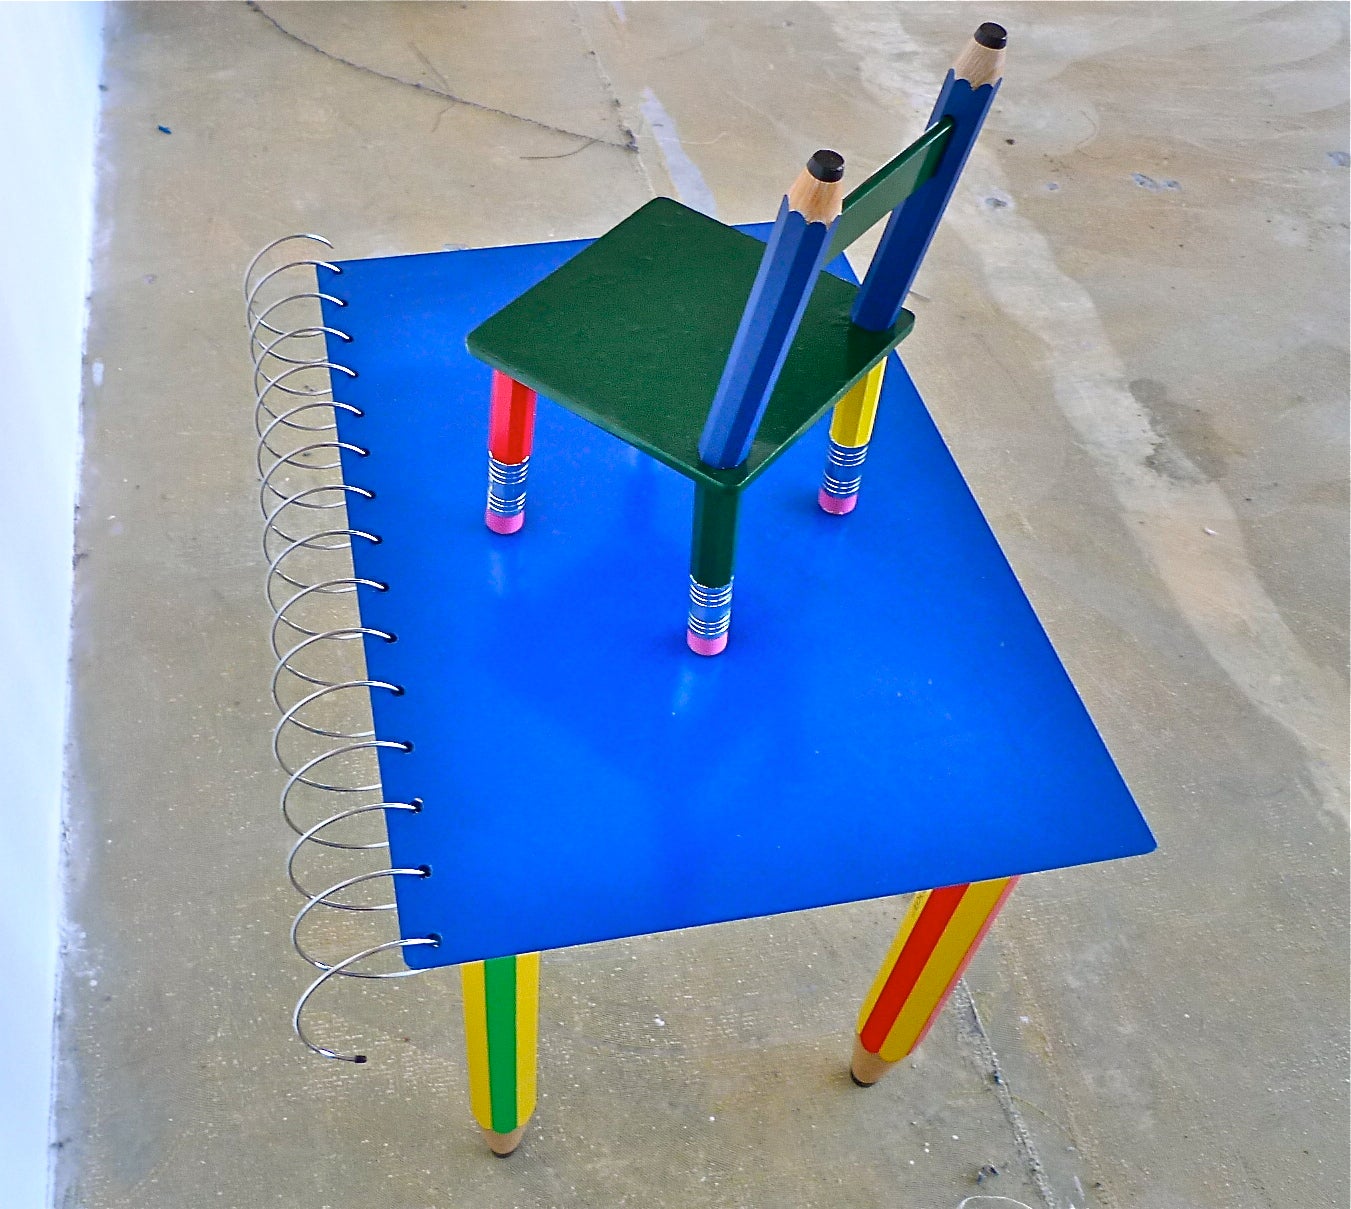 Pierre Sala's "Clairefontaine" Spiral Notebook Table & Chair